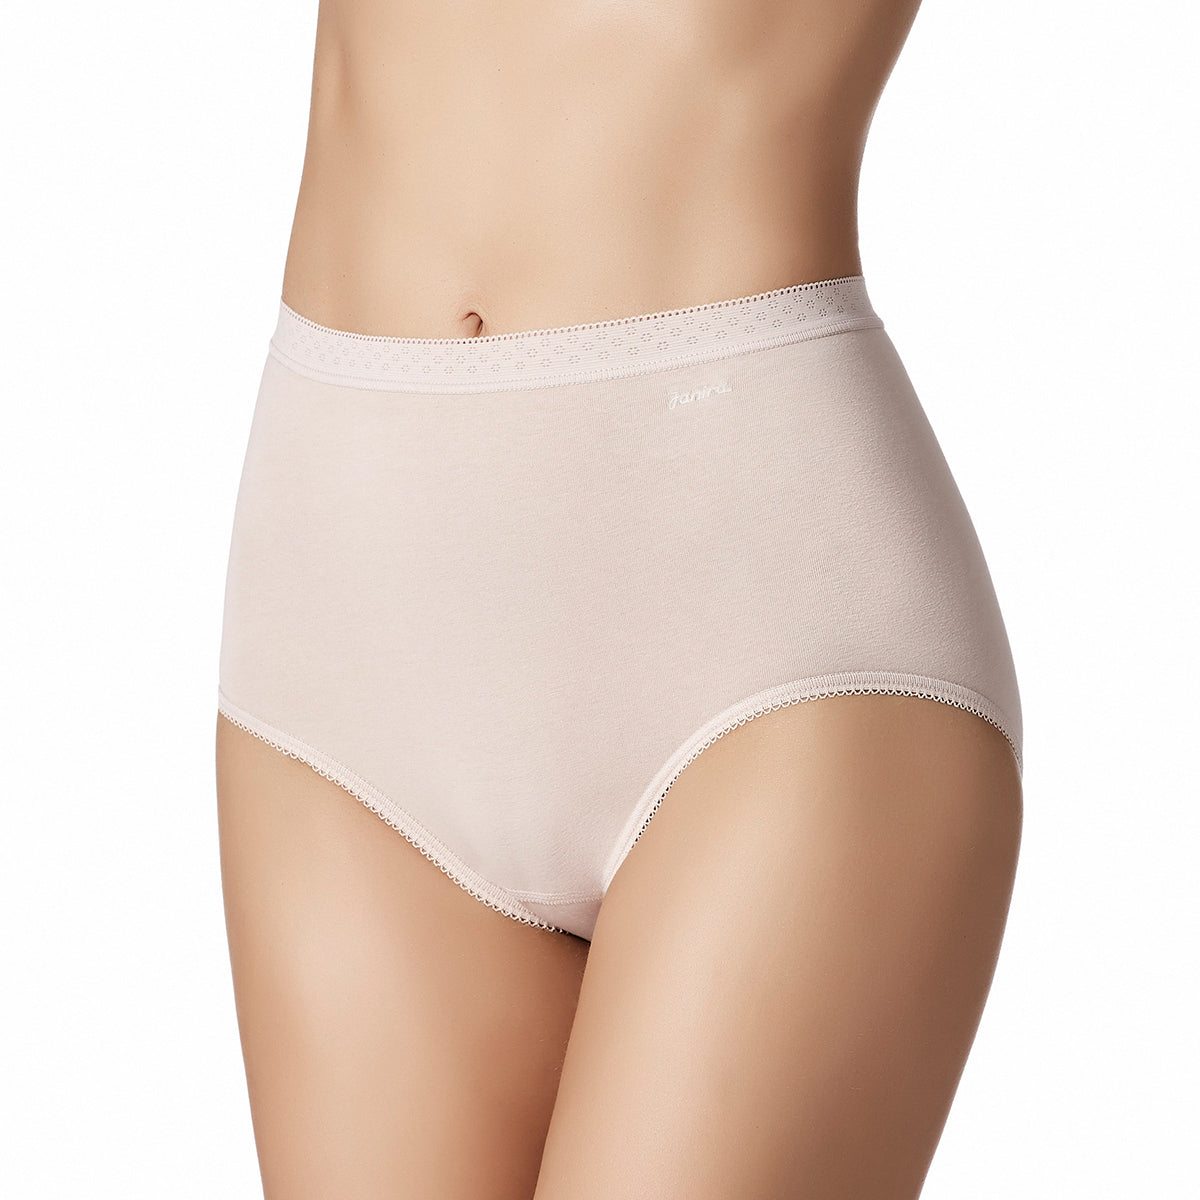 Hanes Women's Cotton 6+3pk Free Hipster Underwear - Colors May Vary 5